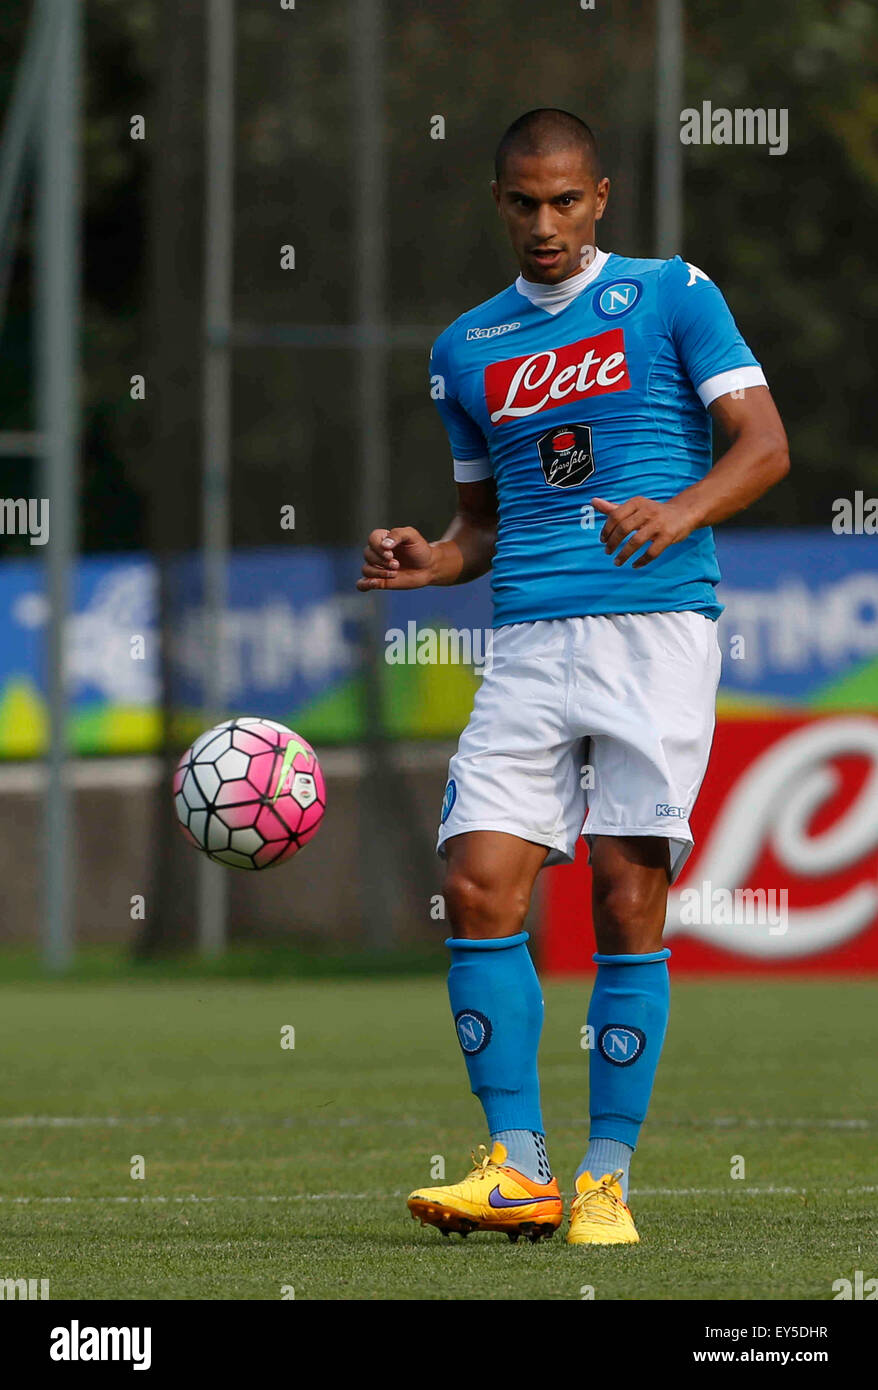 Dimaro, Italy. 21st July, 2015. Gokhan Inler  during friendly match soccer between ssc Napoli and Ananue for preseason summer training of Italy soccer team  SSC Napoli  in Dimaro Italy.  Credit:  agnfoto/Alamy Live News Stock Photo